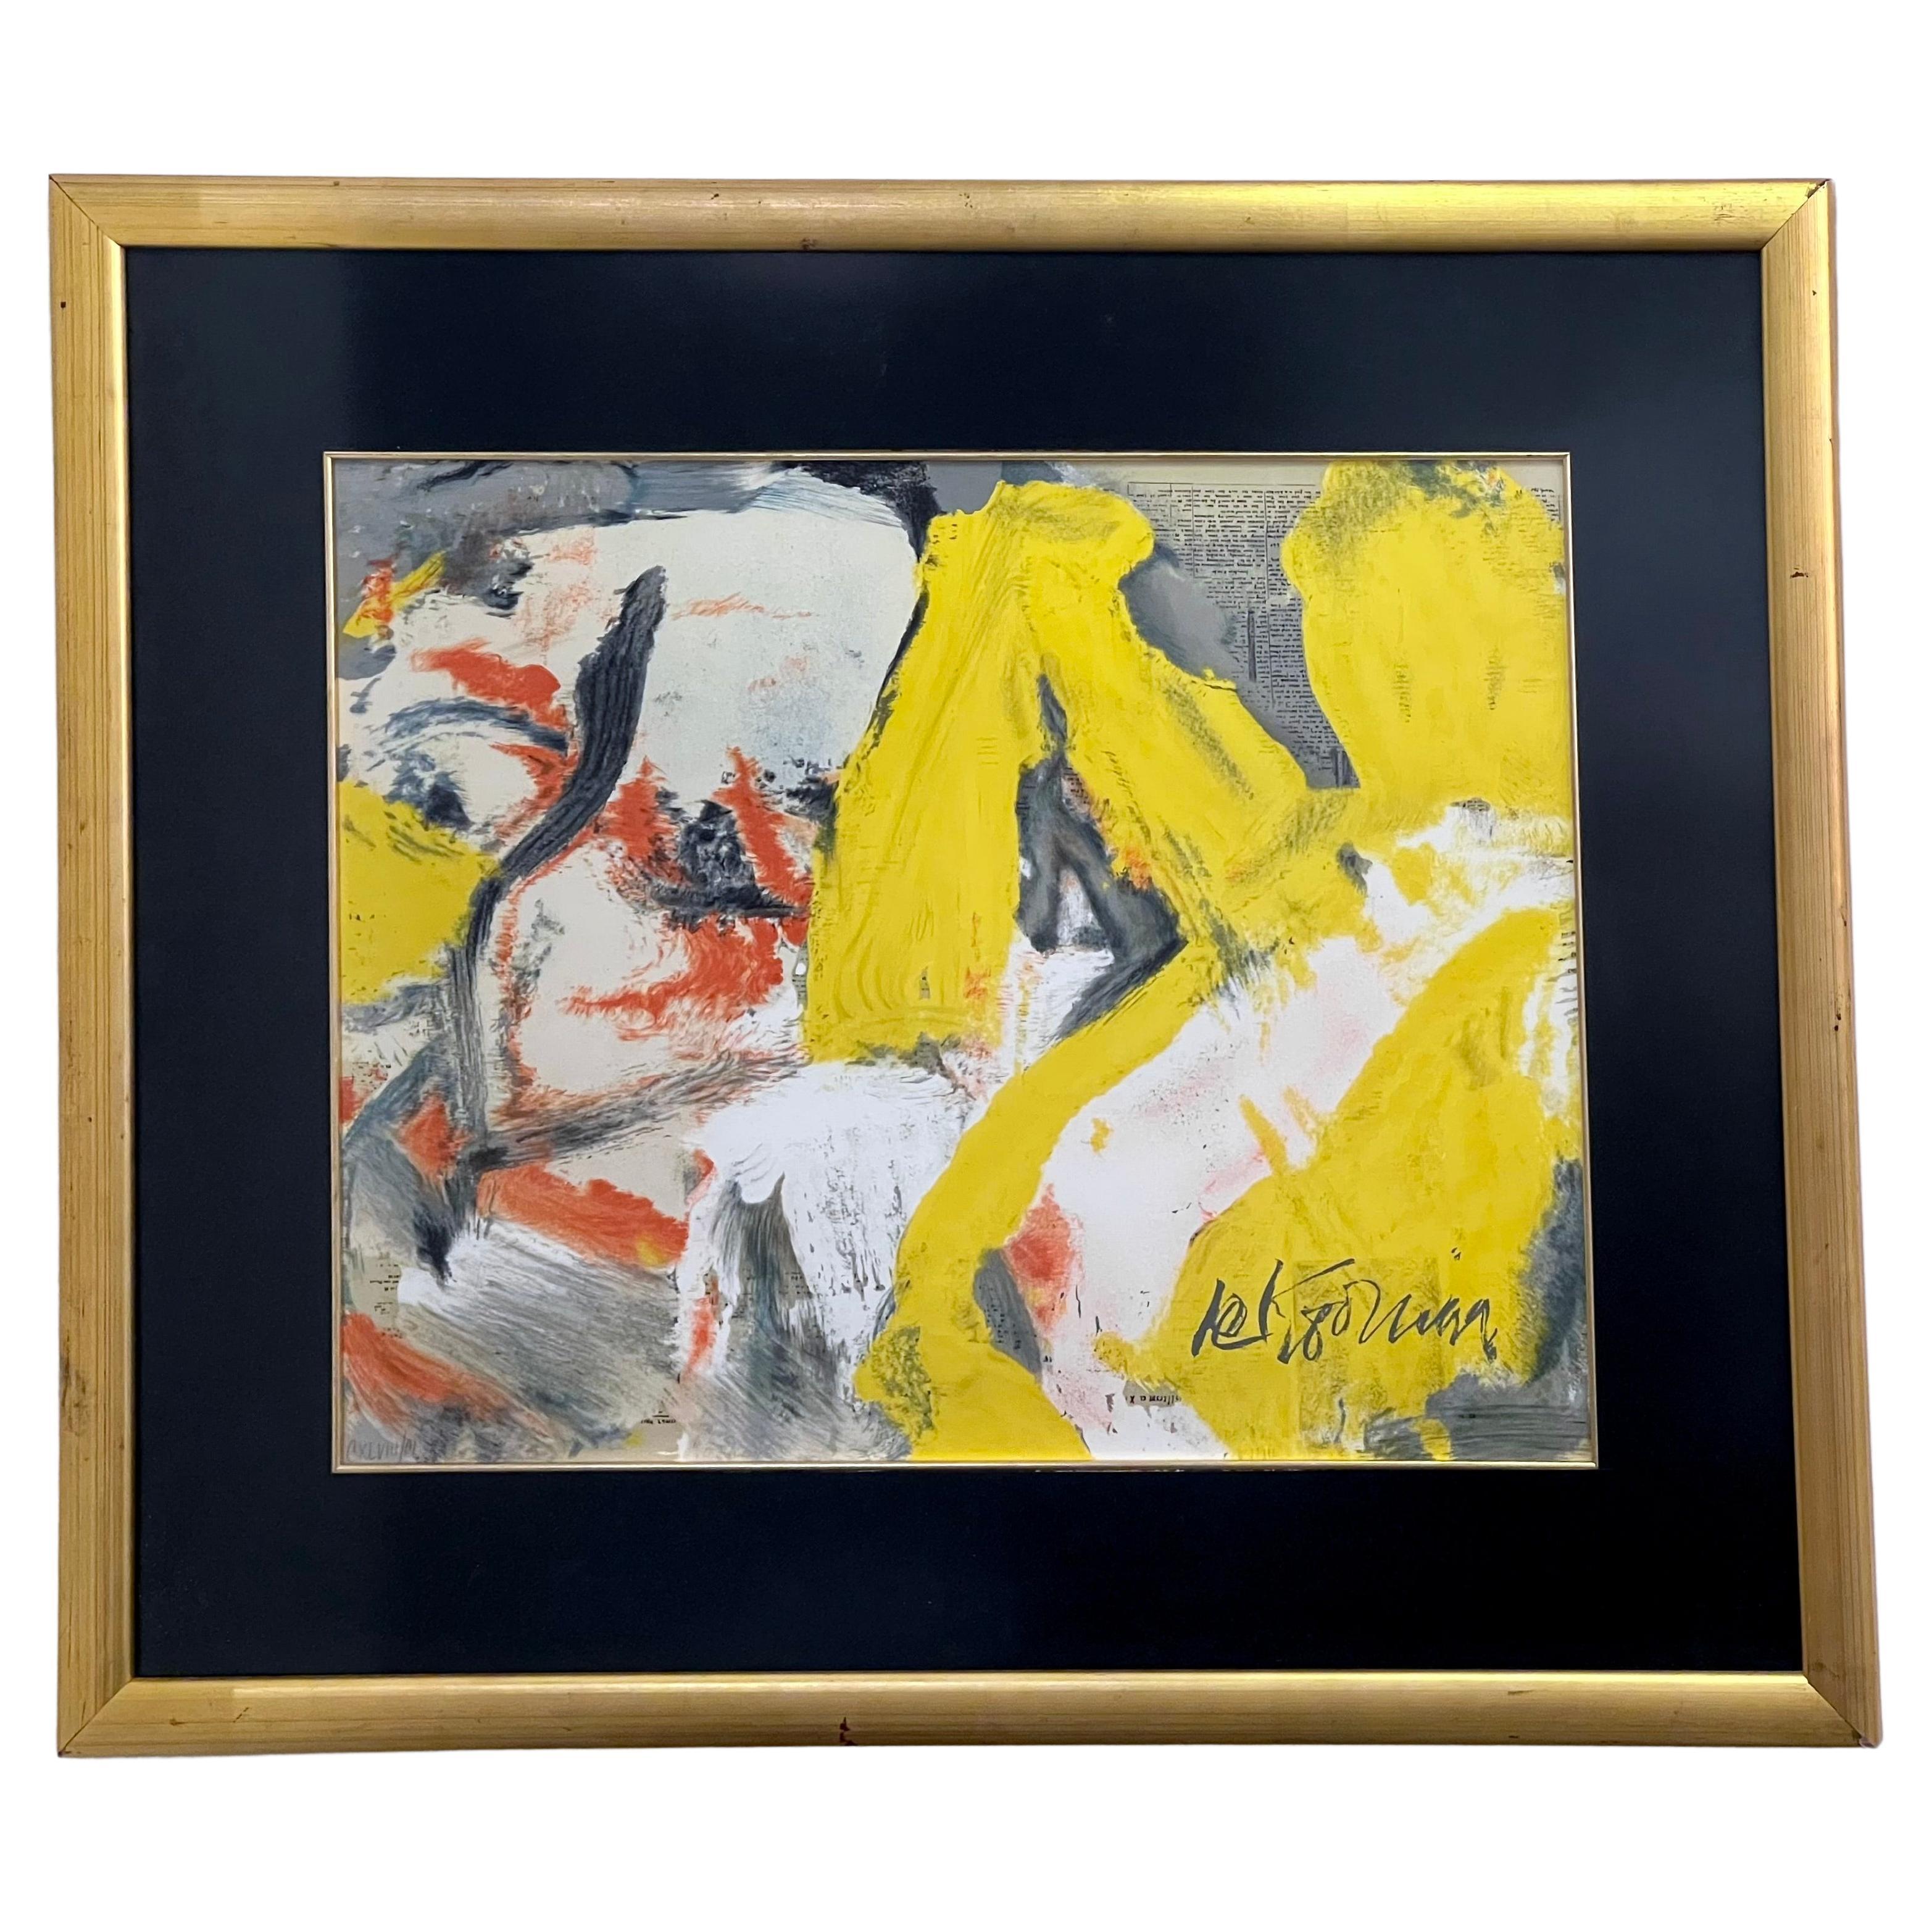 "the Man and the Big Blonde" by Willem de Kooning For Sale